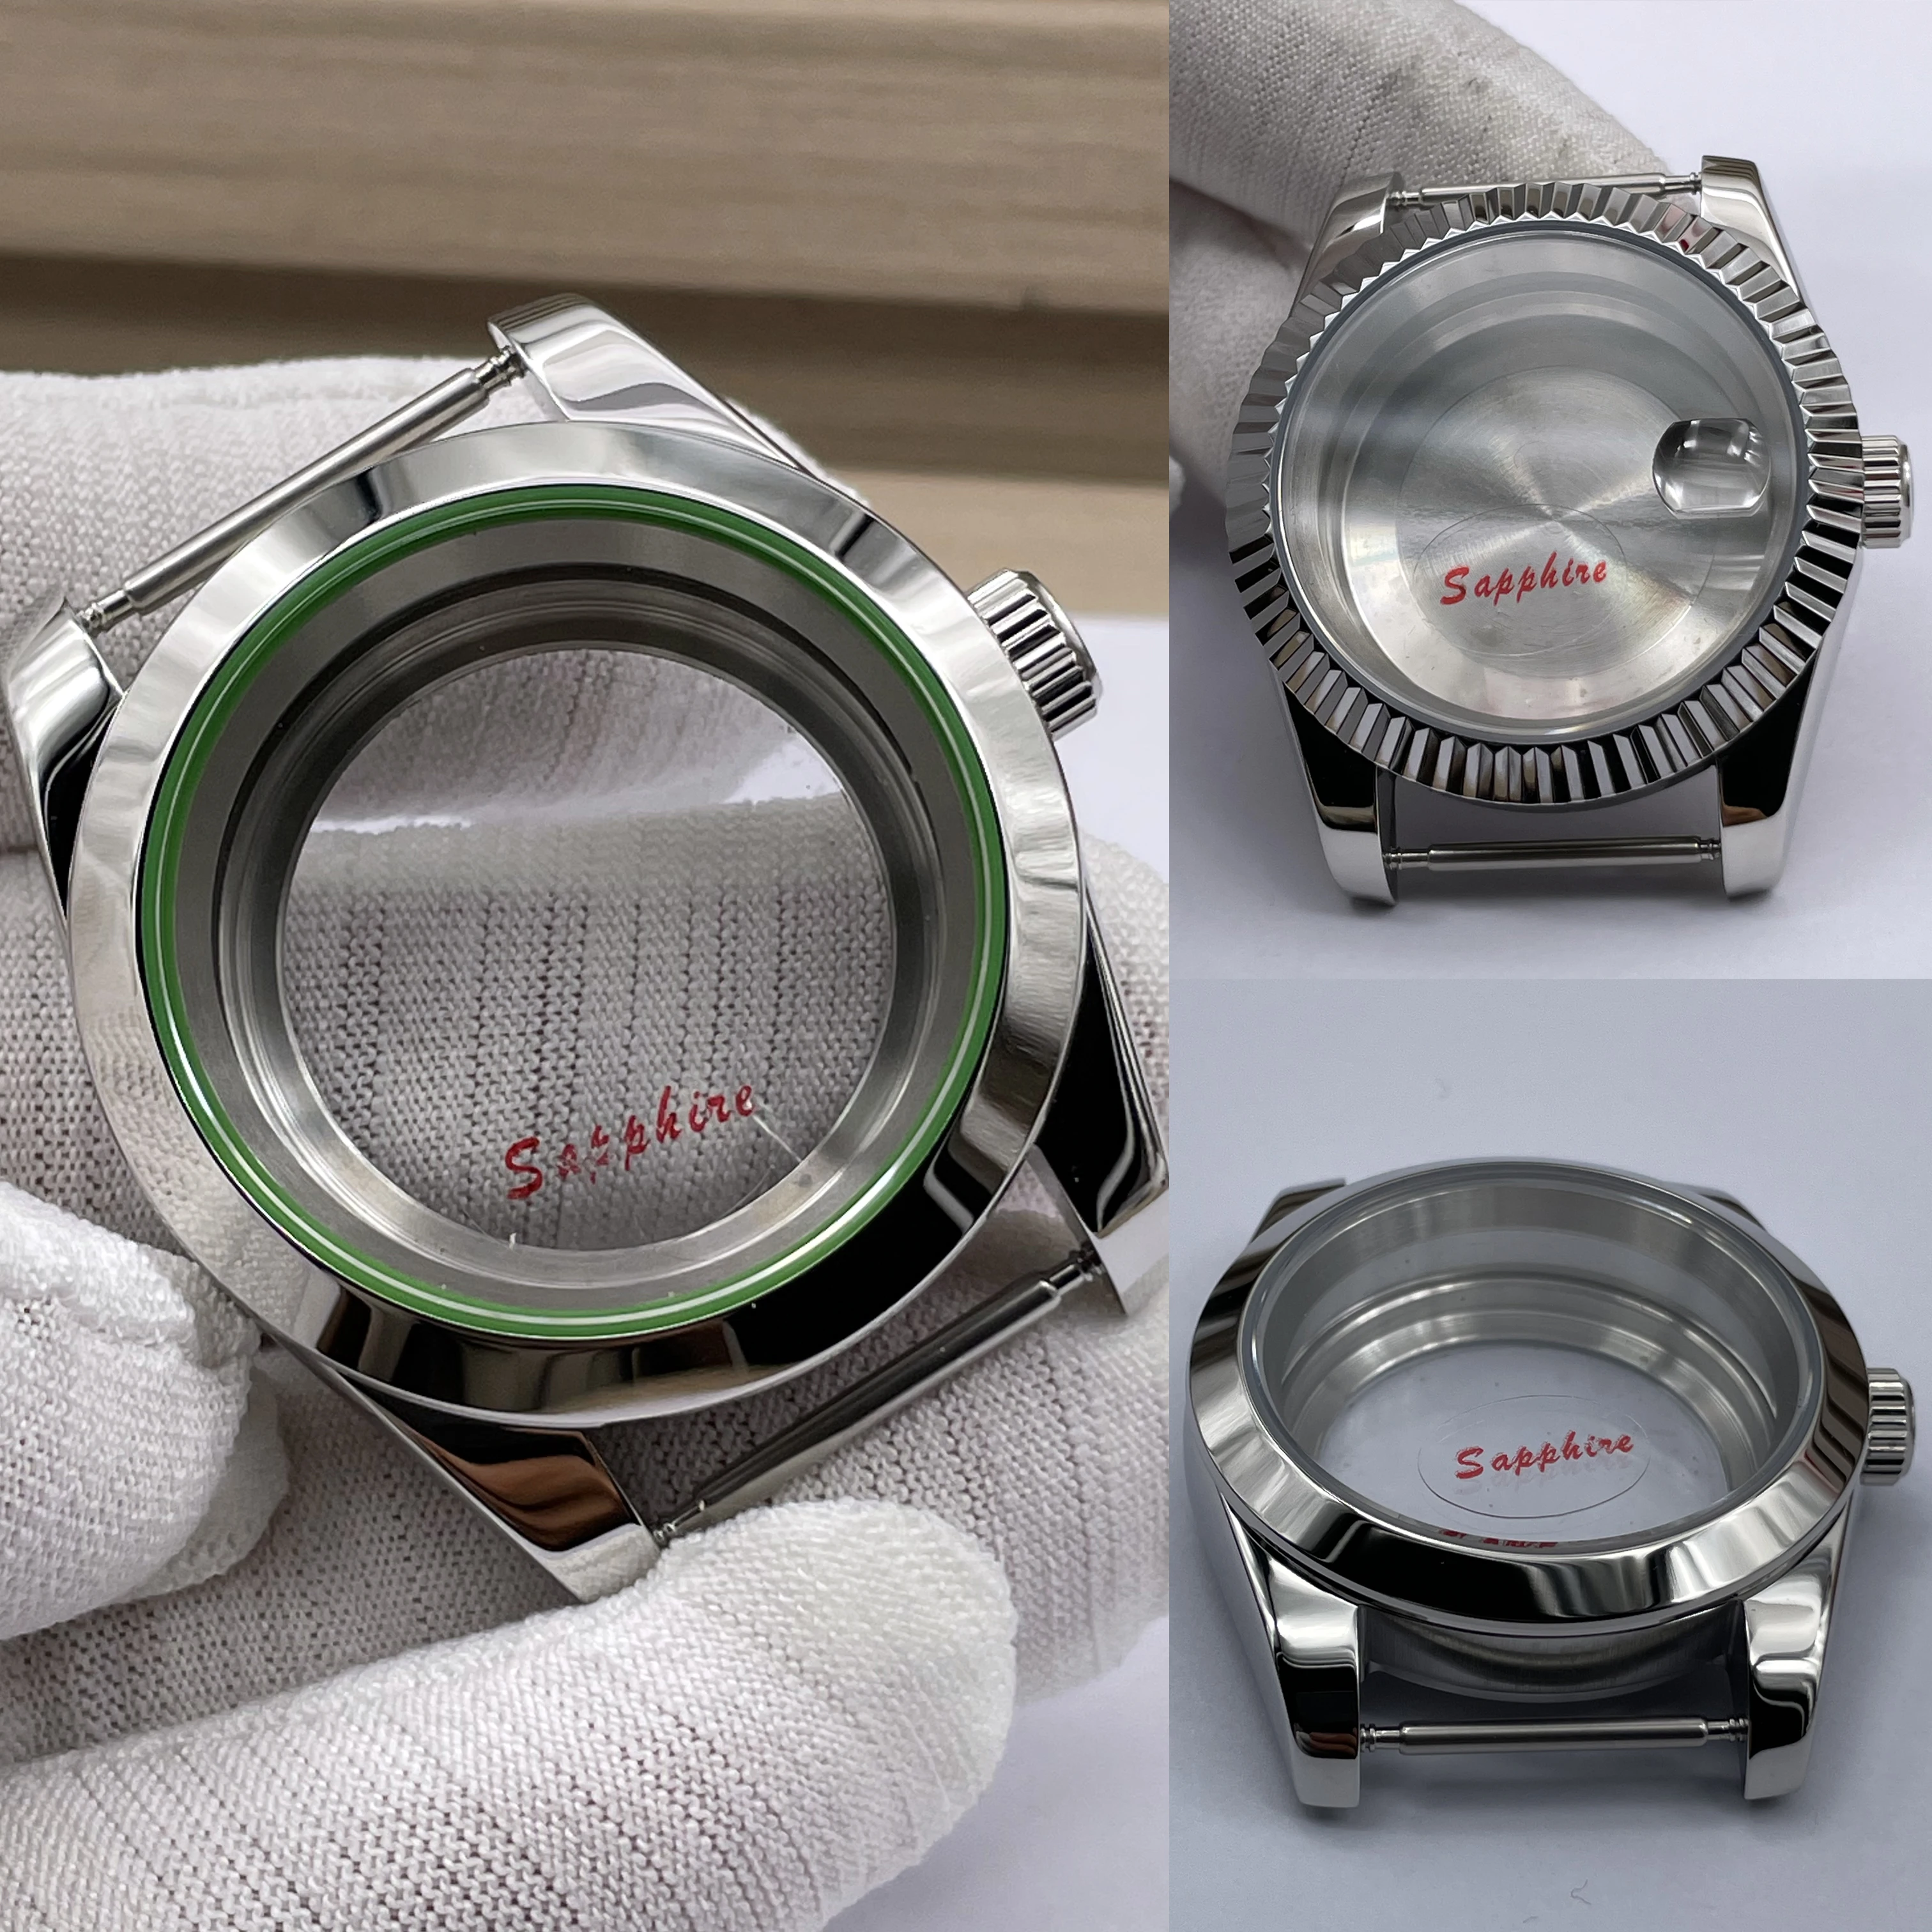 

40mm Men Watch Case Fit NH35 NH36 NH34 Movement Fit 28.5mm-29.3mm dial Sapphire Glass Case for Solid 316L stainless steel watch